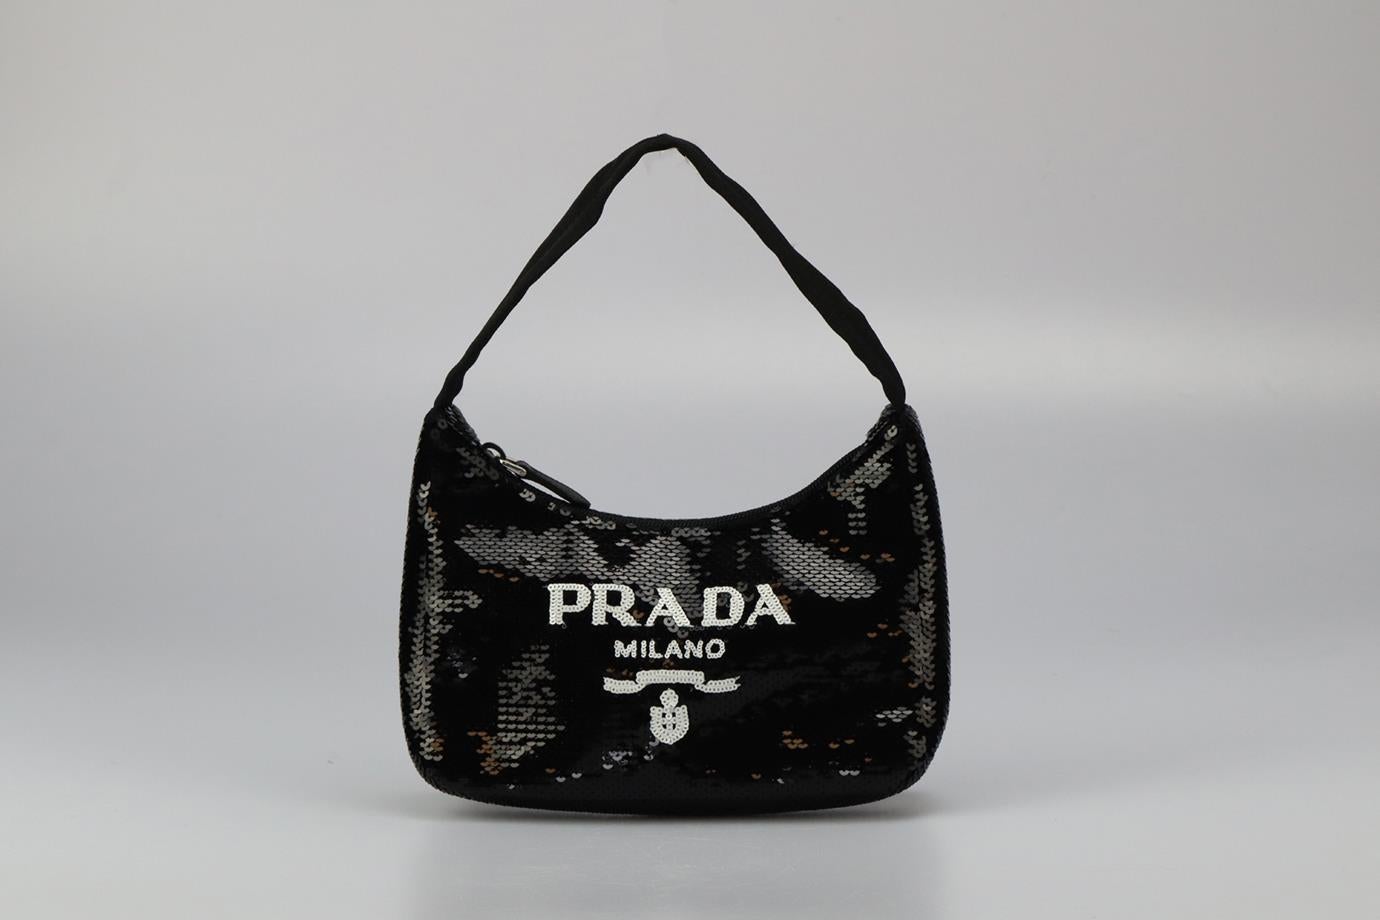 Prada Re-edition 2000 Sequined Nylon Shoulder Bag. Black. Zip fastening - Top. Comes with - authenticity card. Does not come with - dustbag or box. Height: 6.4 in. Width: 8.7 in. Depth: 2.2 in. Handle drop: 6.5 in. Condition: New without box.